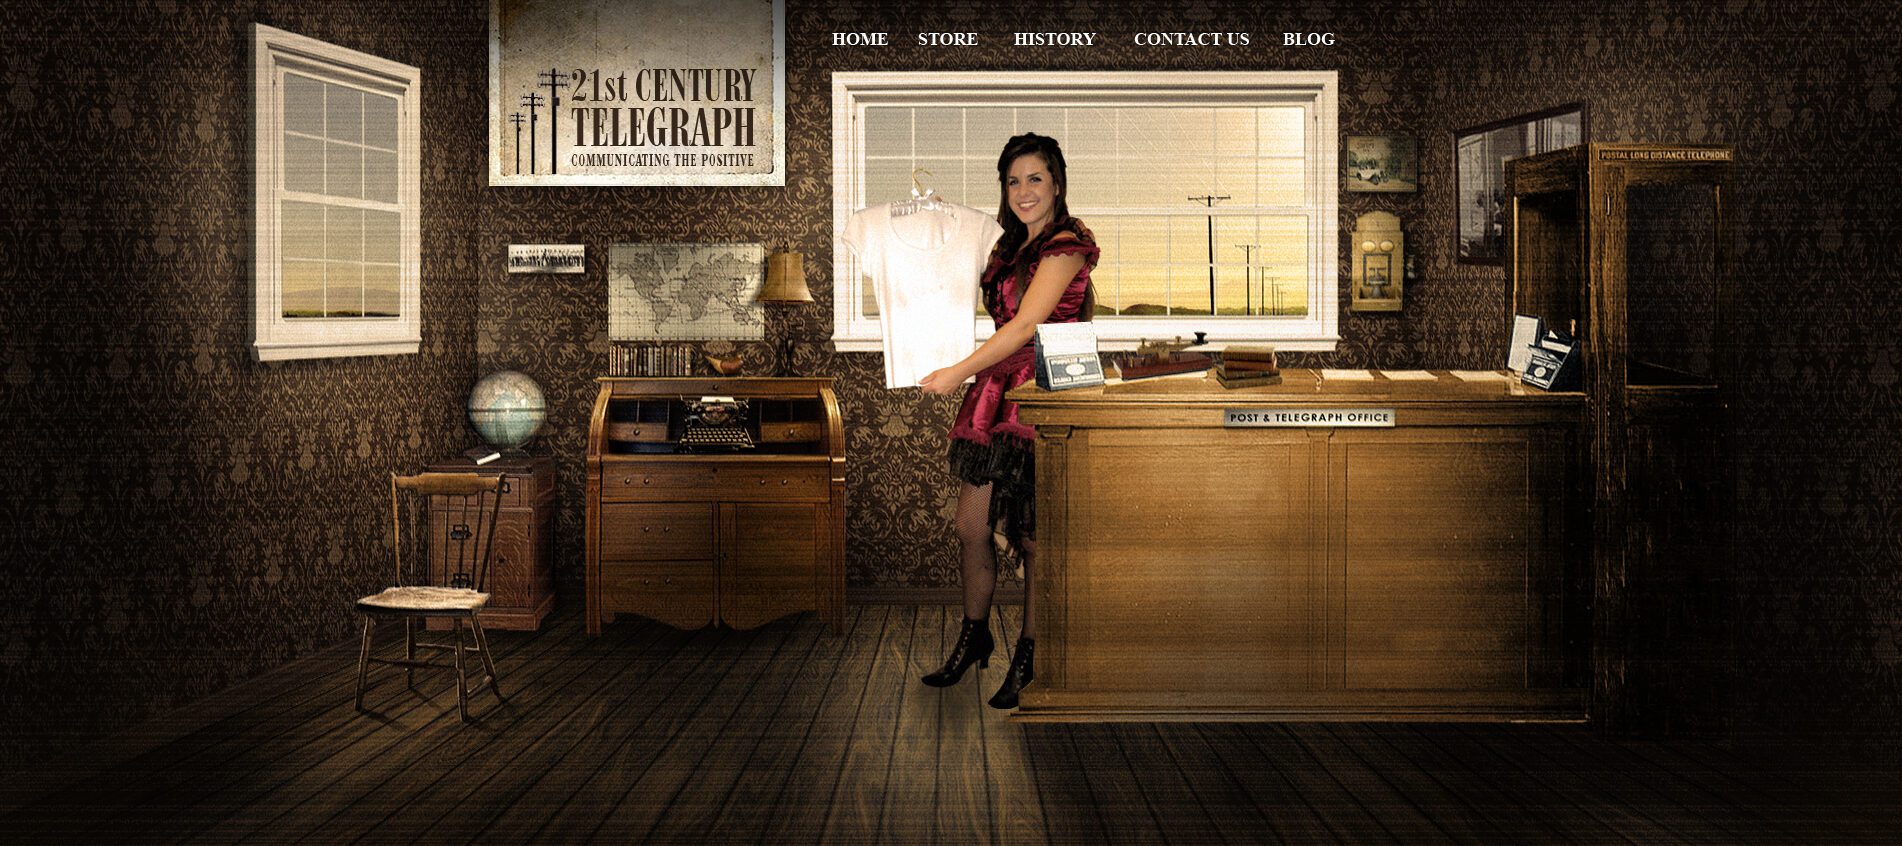 21st Century Telegraph | Phoenix Website Design | Graphic, Print, Logo, and Website Design Solutions serving locally for Tempe Arizona and Phoenix Valley Cities